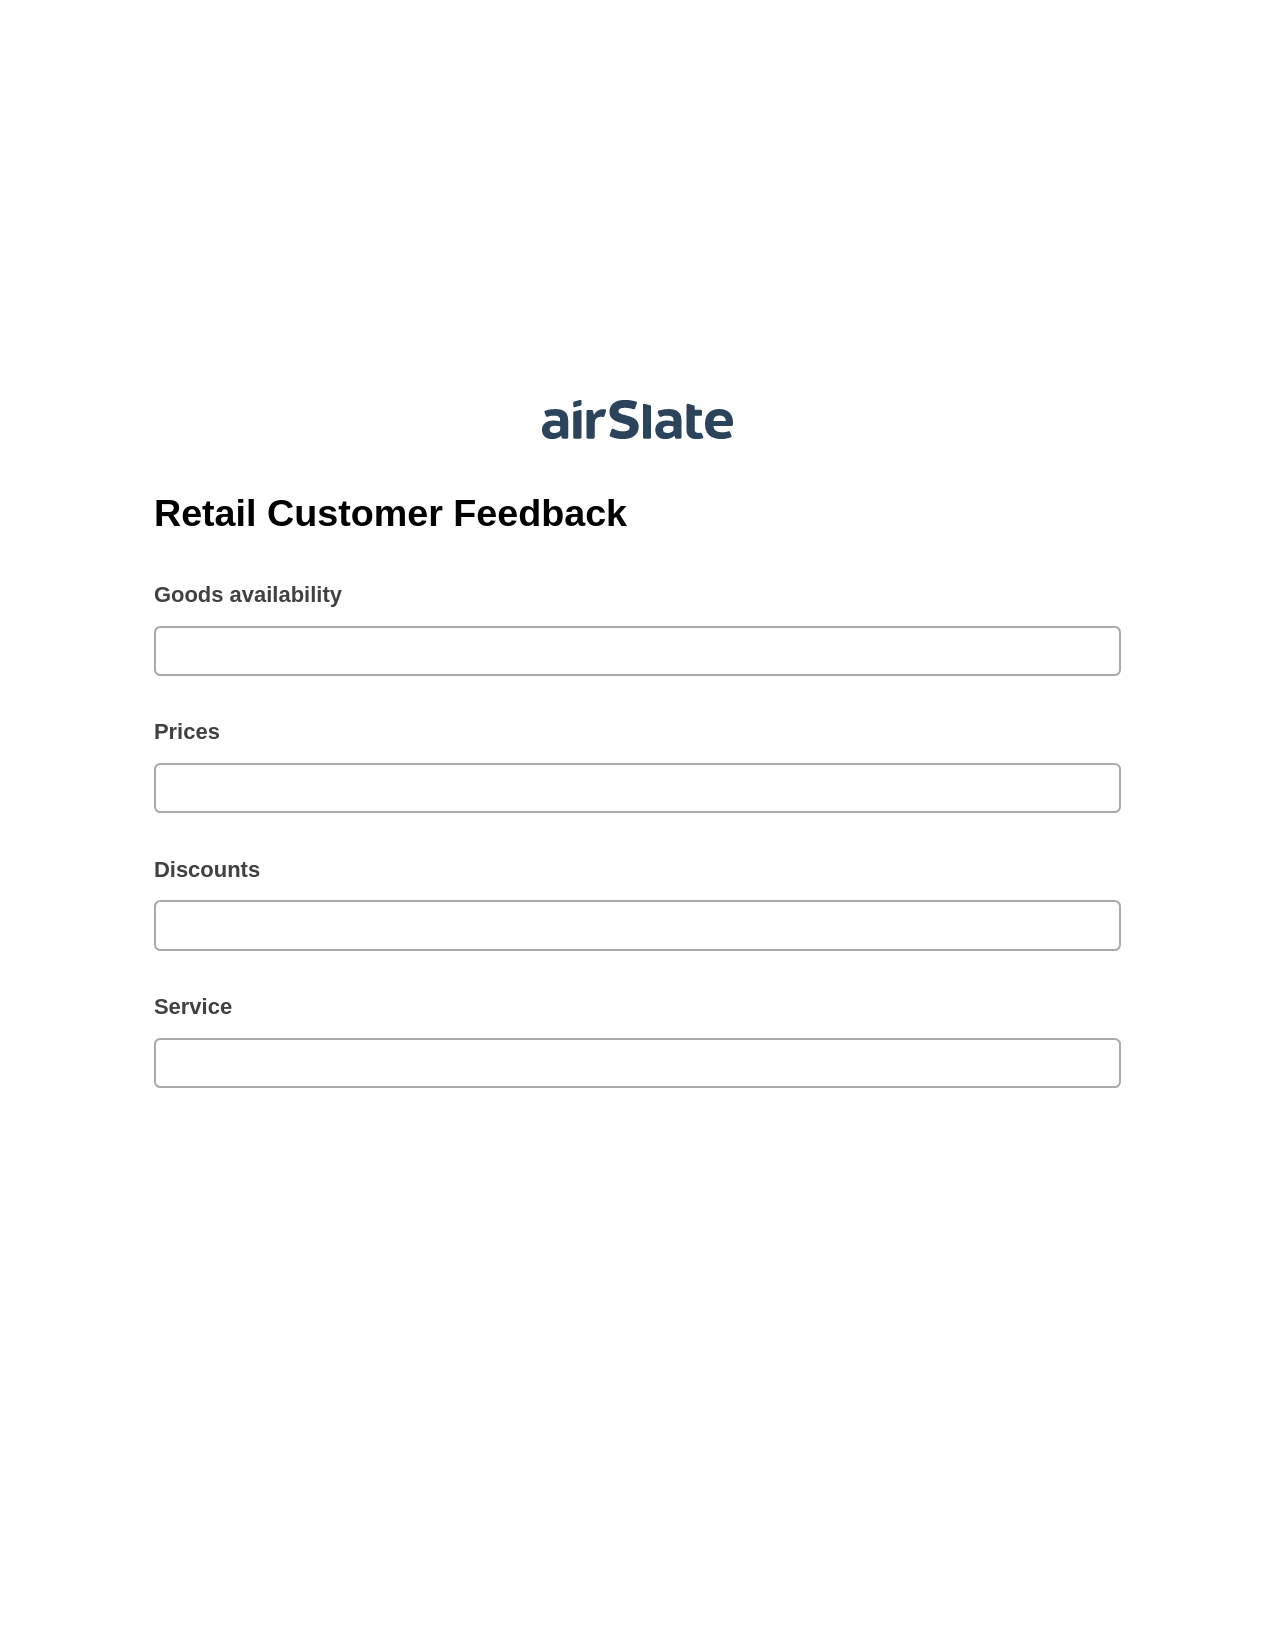 Retail Customer Feedback Pre-fill Slate from MS Dynamics 365 Records Bot, Send a Slate to Salesforce Contact Bot, Export to Formstack Documents Bot